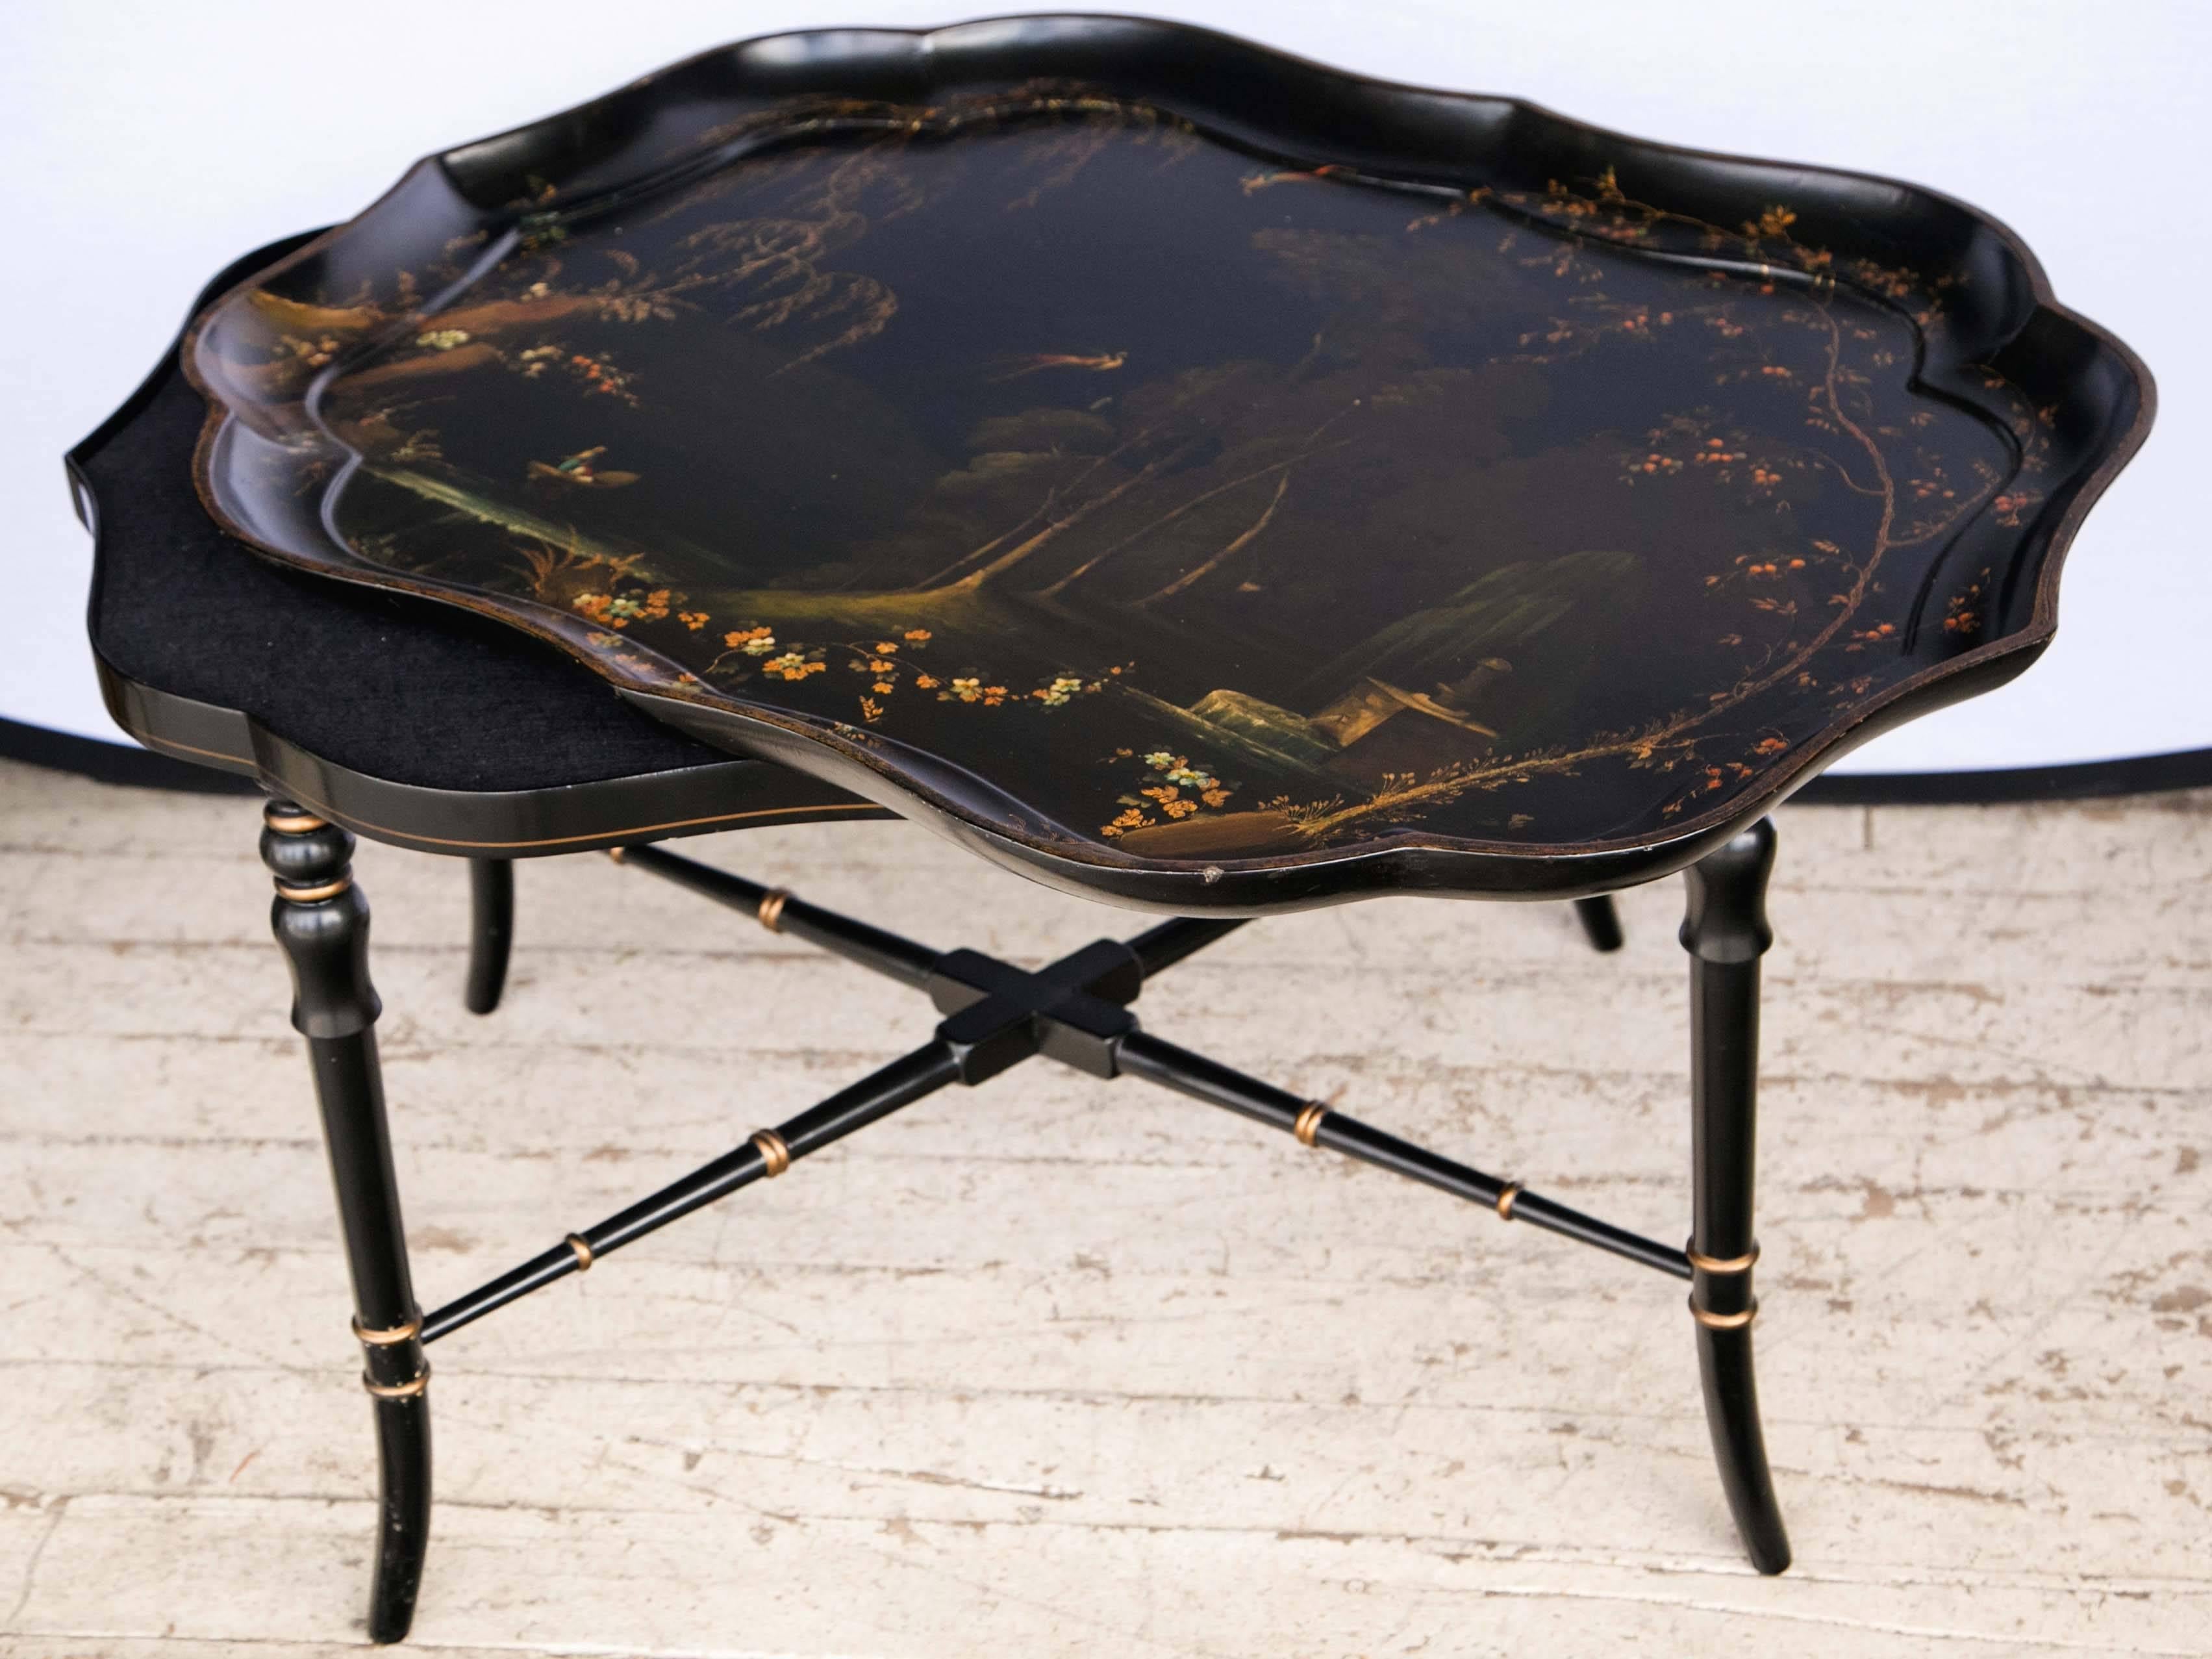 19th Century Fine English Regency Lacquer Tray on Stand